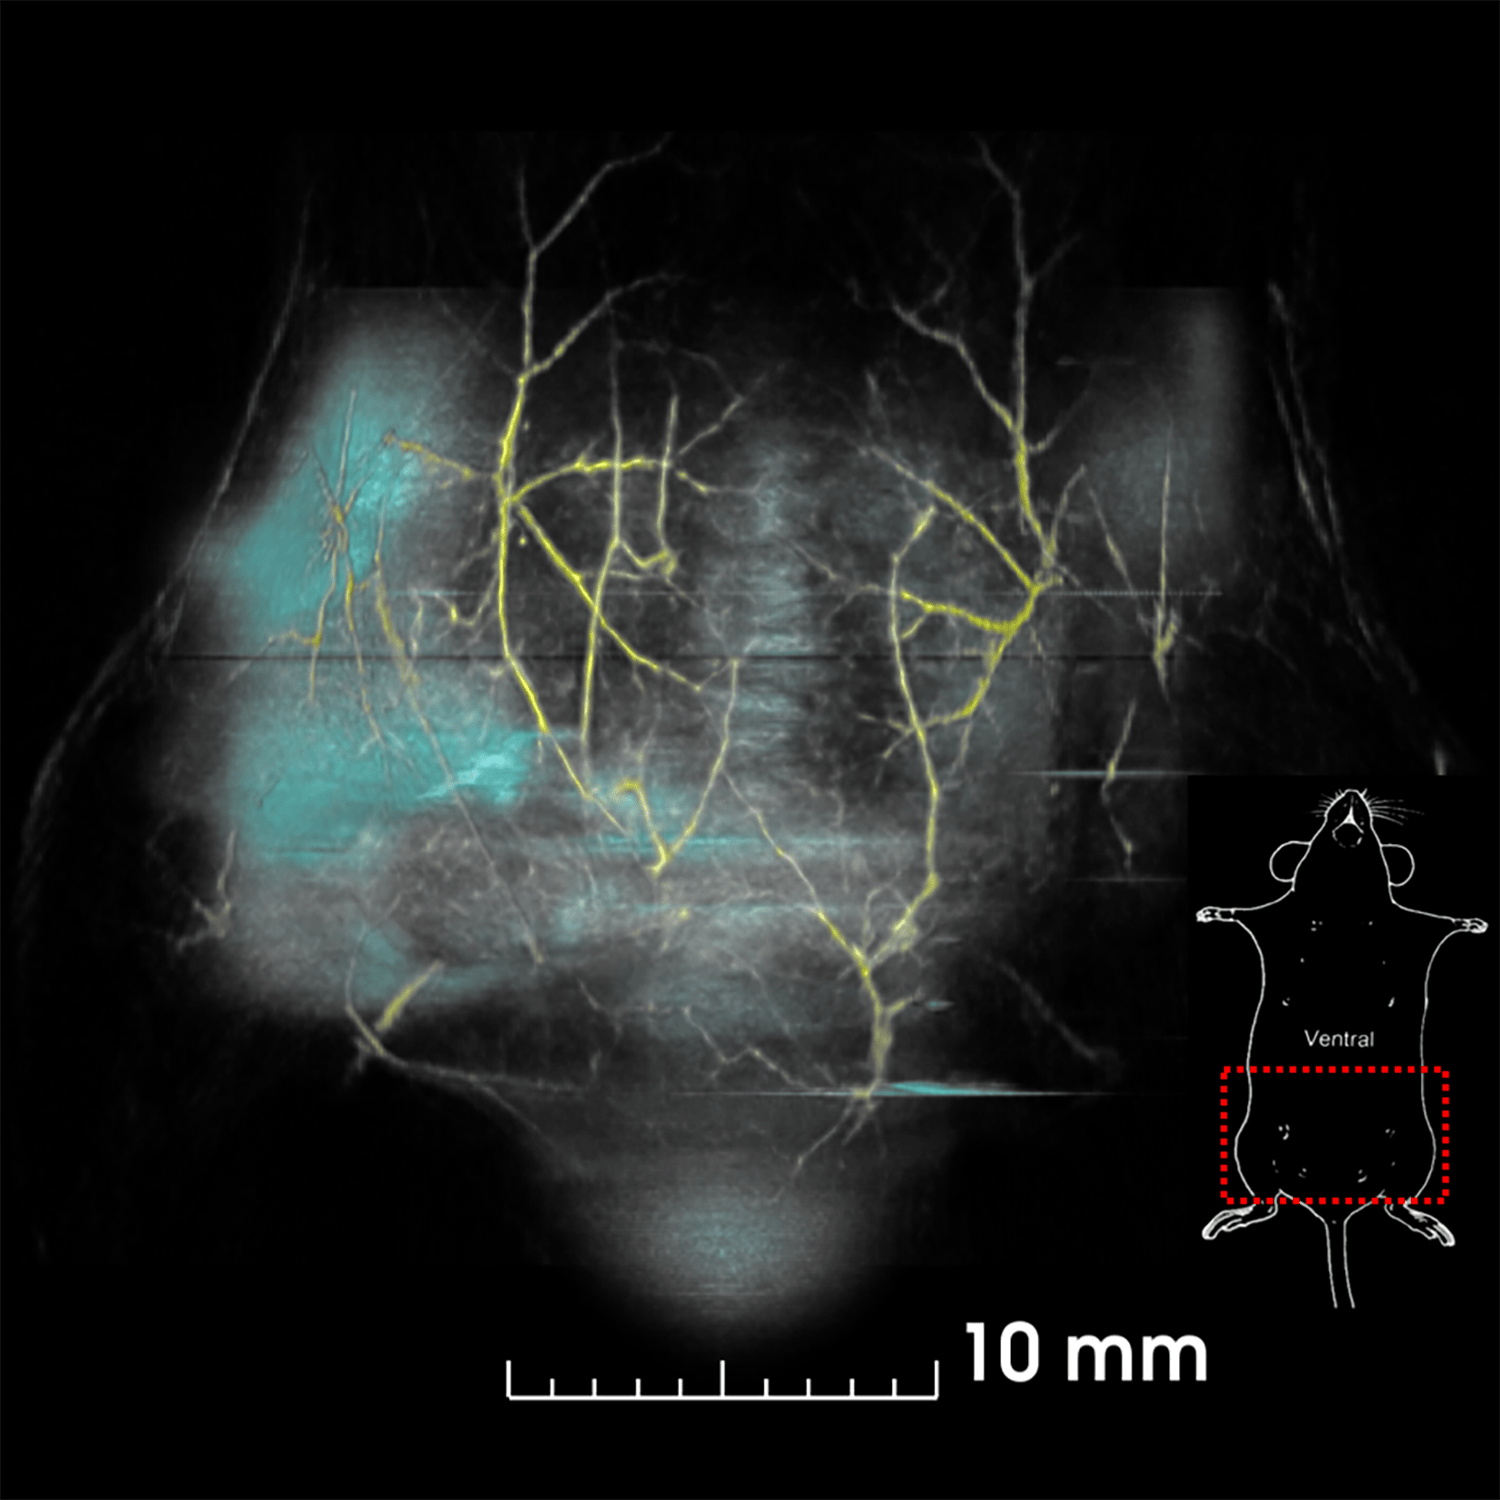 Combined Photoacoustic and Fluorescence Tomography (PAFT)